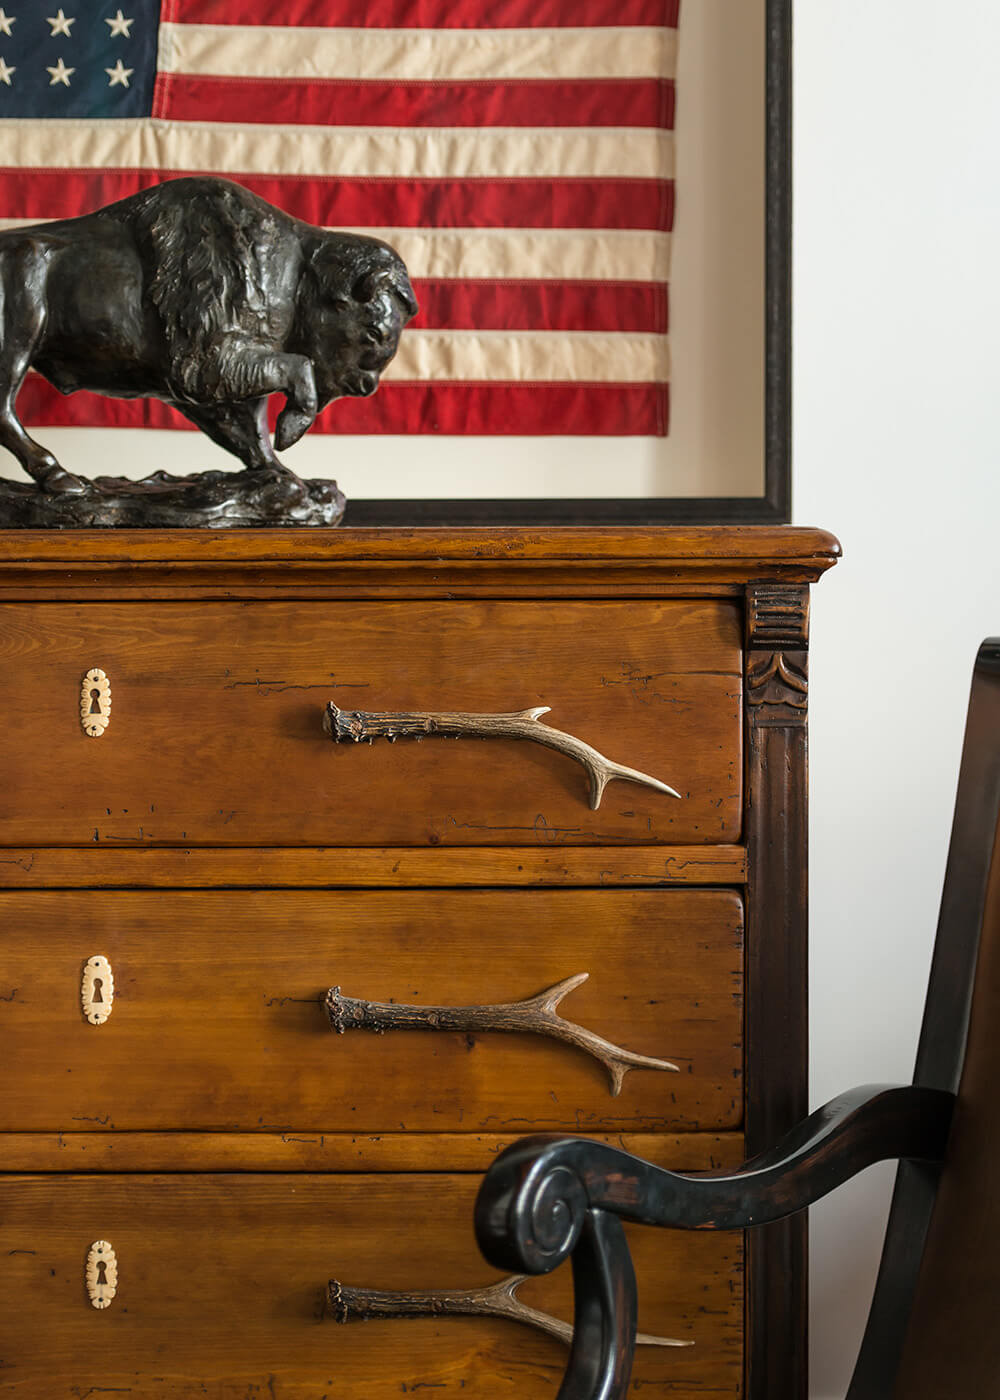 Framed American flag on dresser with buffalo statue.